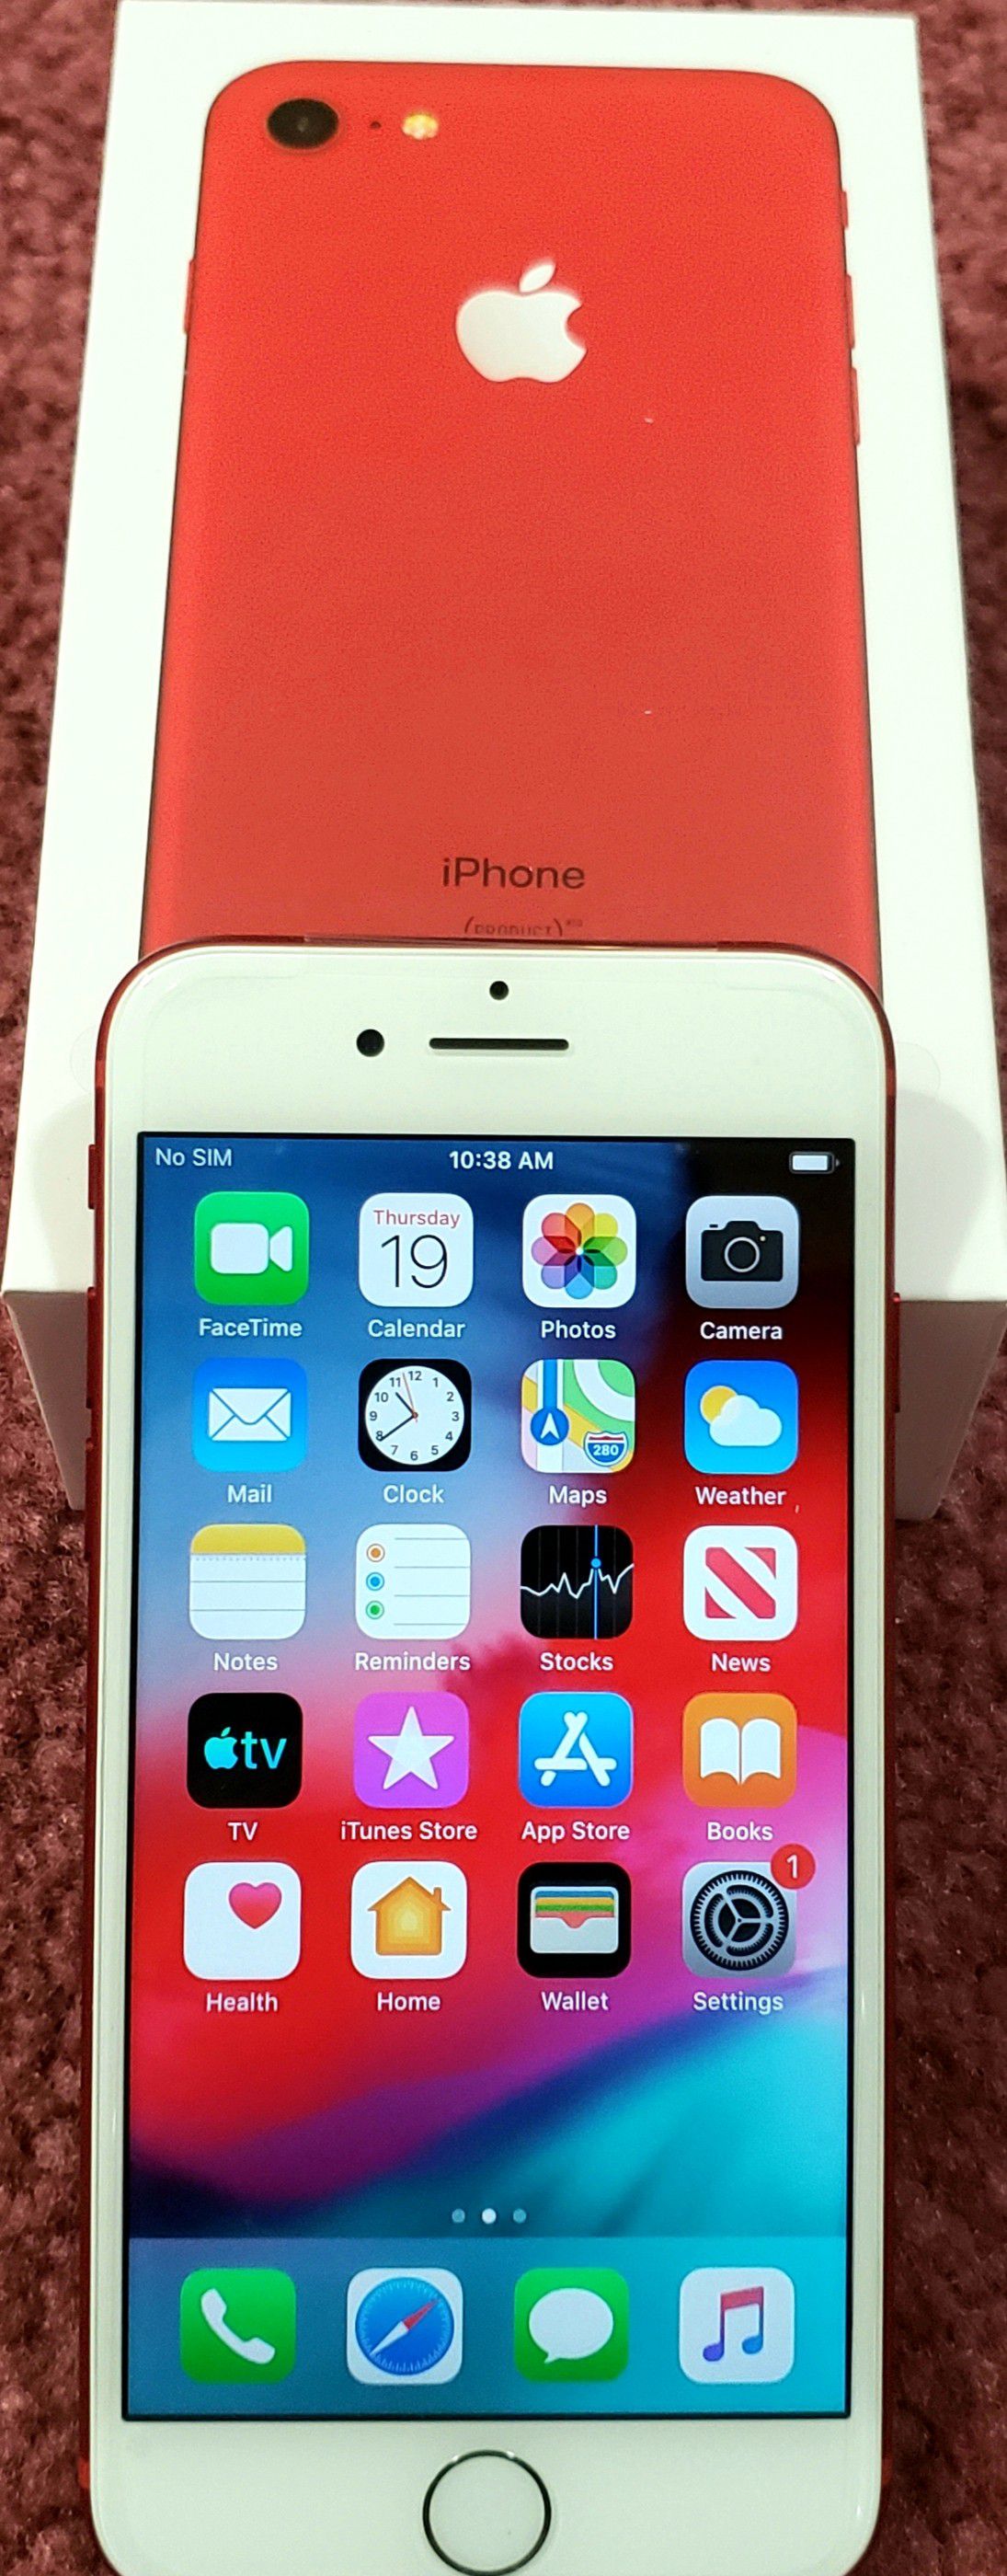 iPhone 7 128GB, Red, Factory Unlocked, Excellent Condition!